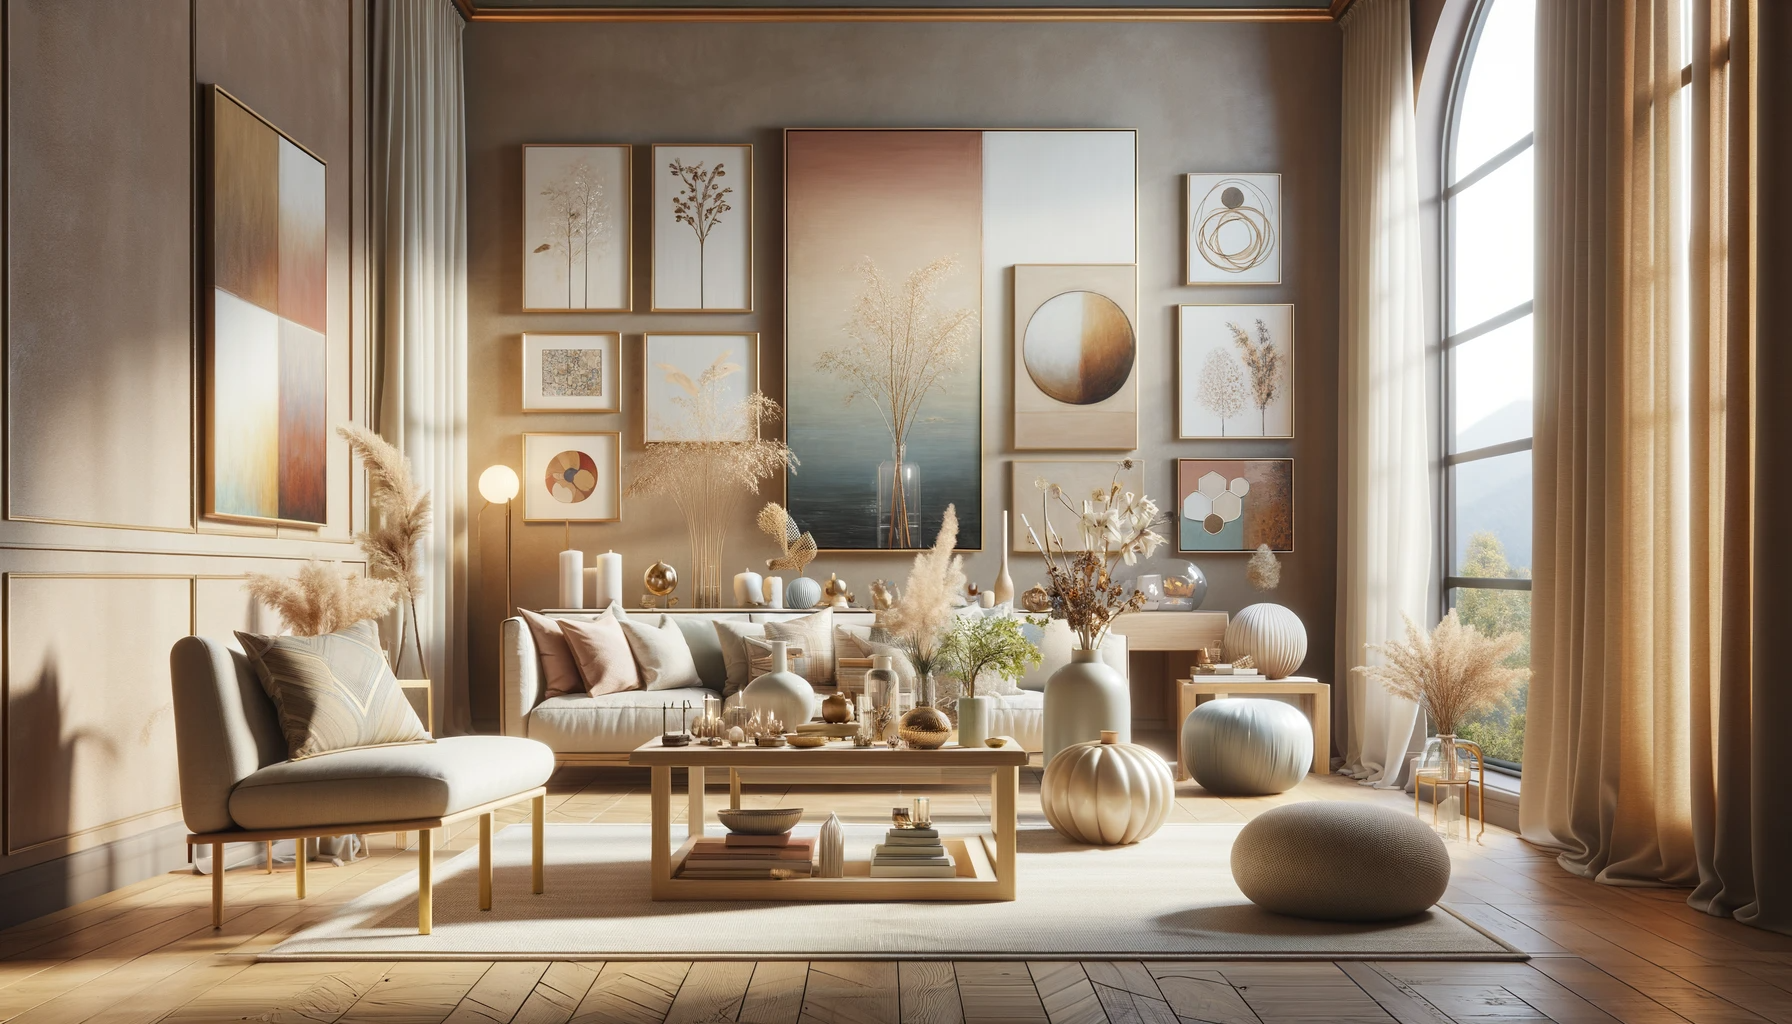 5 Wellness Advantages of Having Art in Your Home